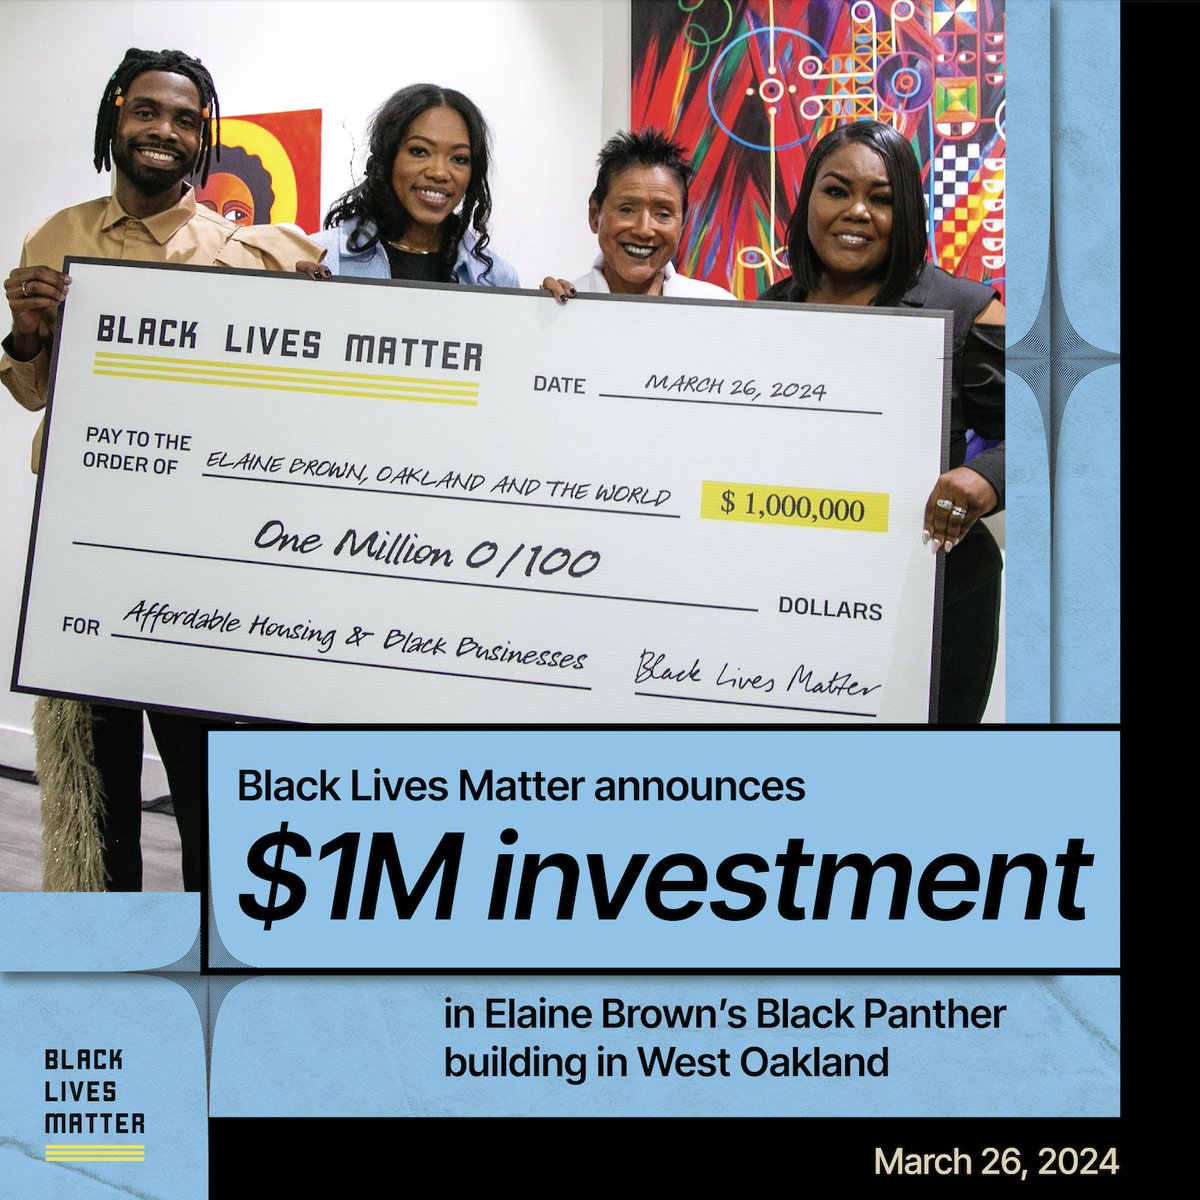 We just presented former Black Panther Chairwoman Elaine Brown with $1 million to fund the Black Panther building in West Oakland and the Black-owned businesses that will make it thrive!